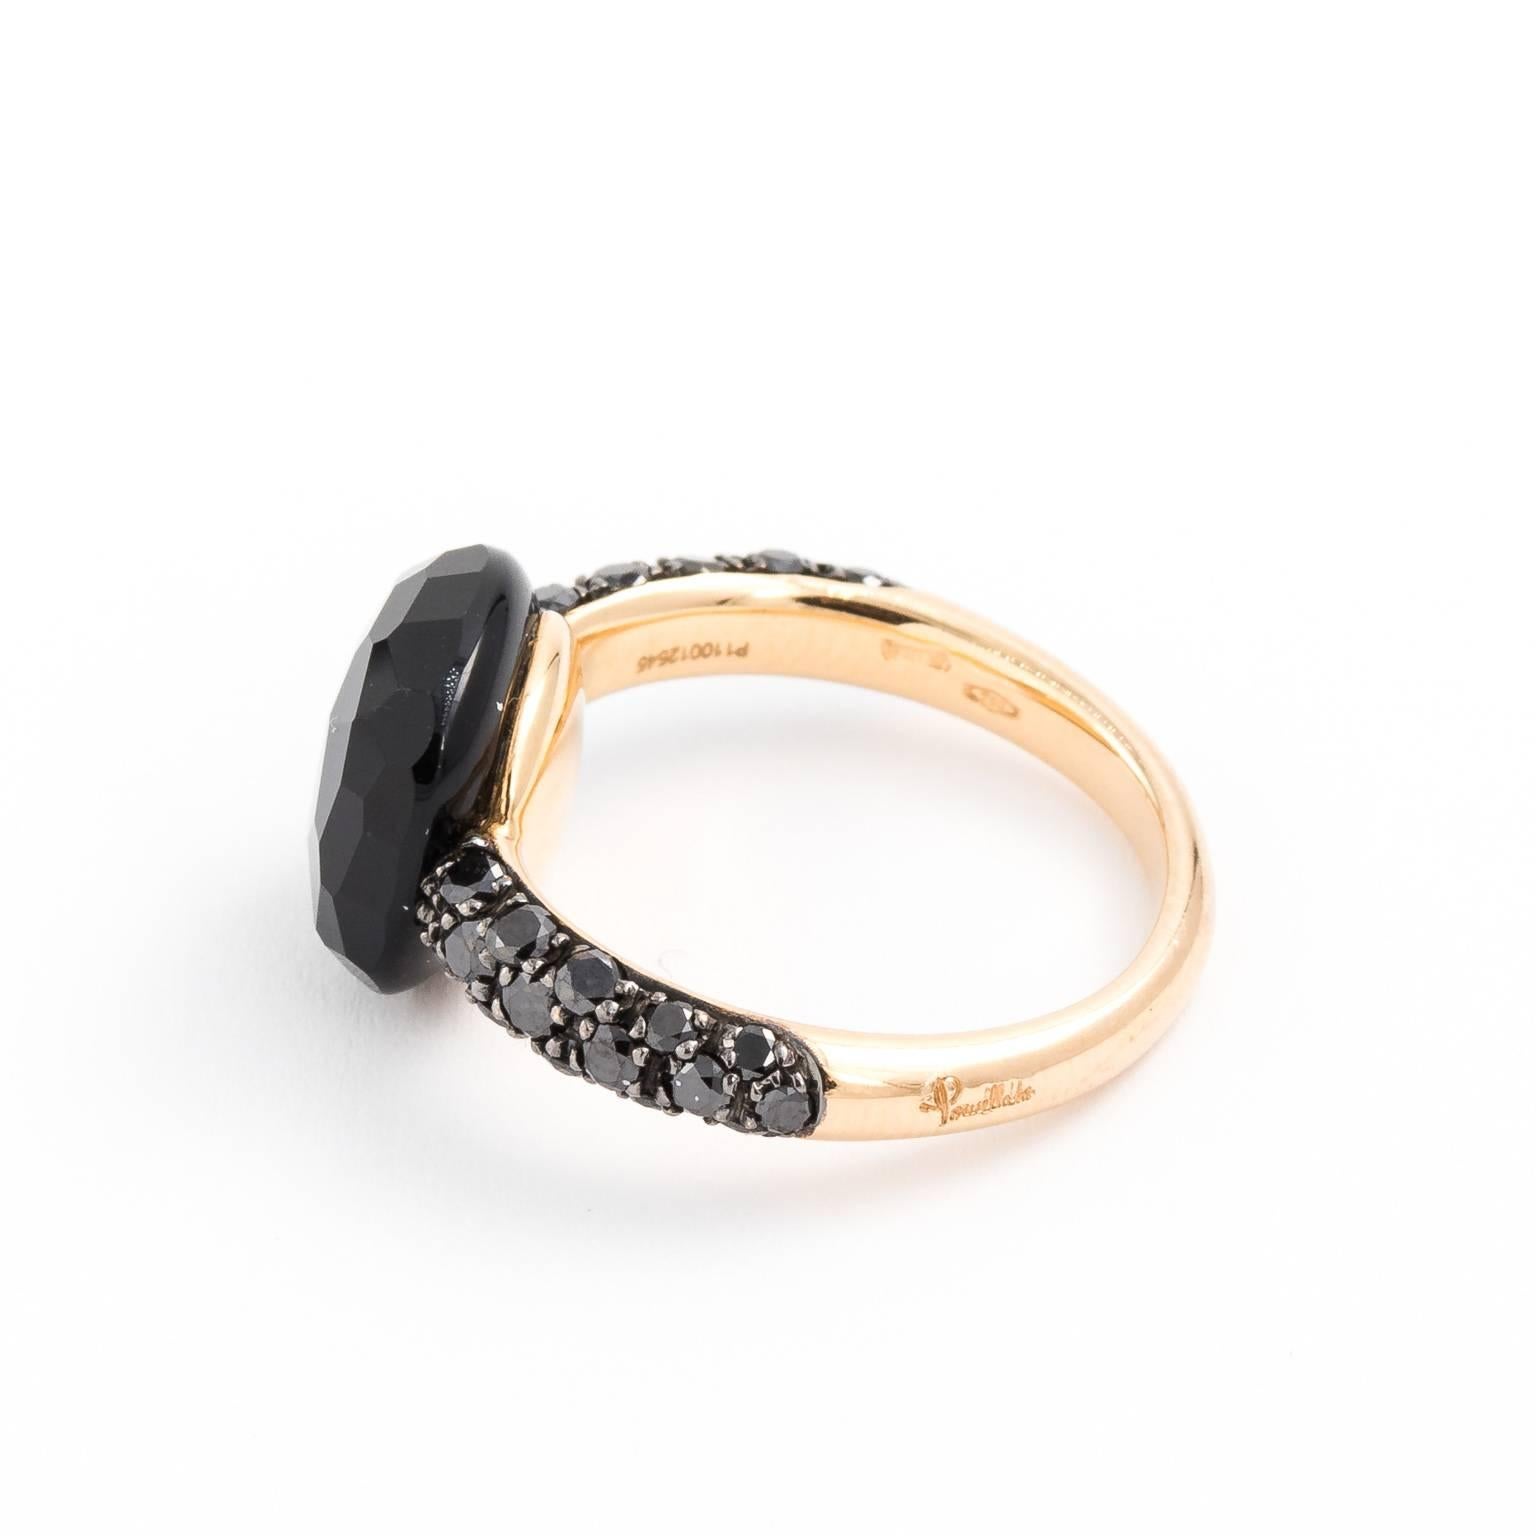 Contemporary Pomellato 18 karat ring with black diamonds and onyx. Shank in yellow 18 karat gold and black diamonds that are set half way up shank that is visible at the top of the ring. Approximately 6 carats of faceted black onyx in square shape